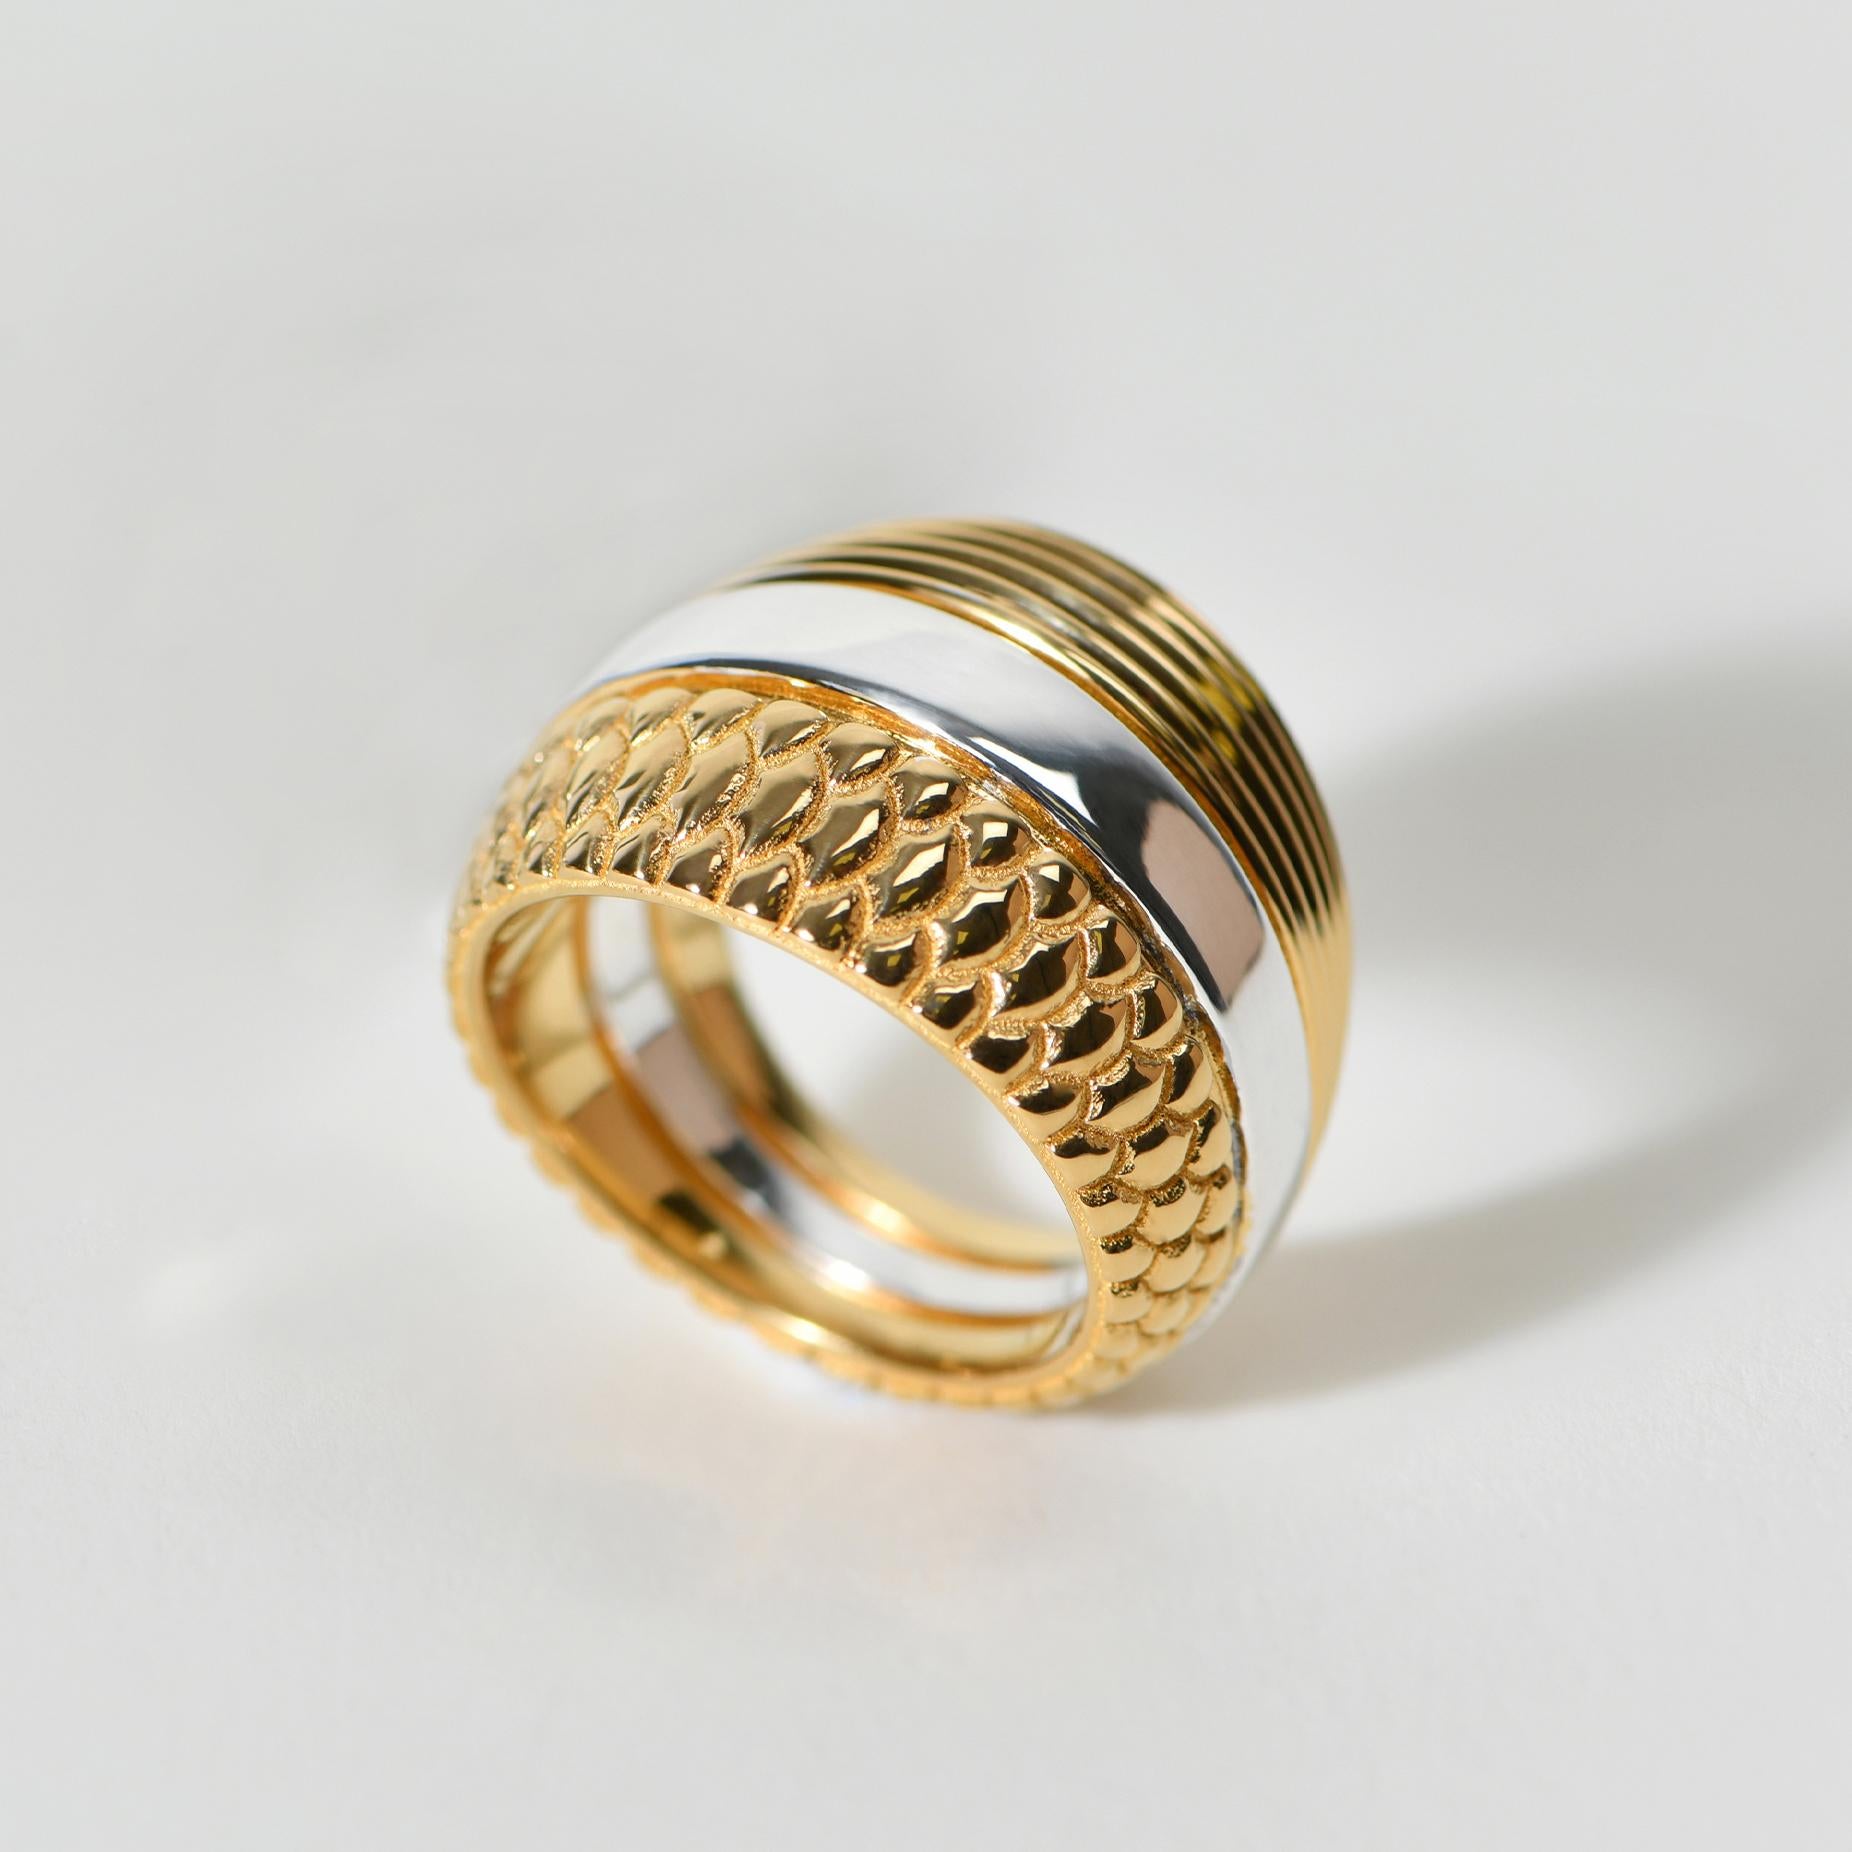 Fish Sterling Silver With 23 Karat Yellow Gold Vermeil Textured Ring - Size 9 In New Condition For Sale In Mexico City, MX